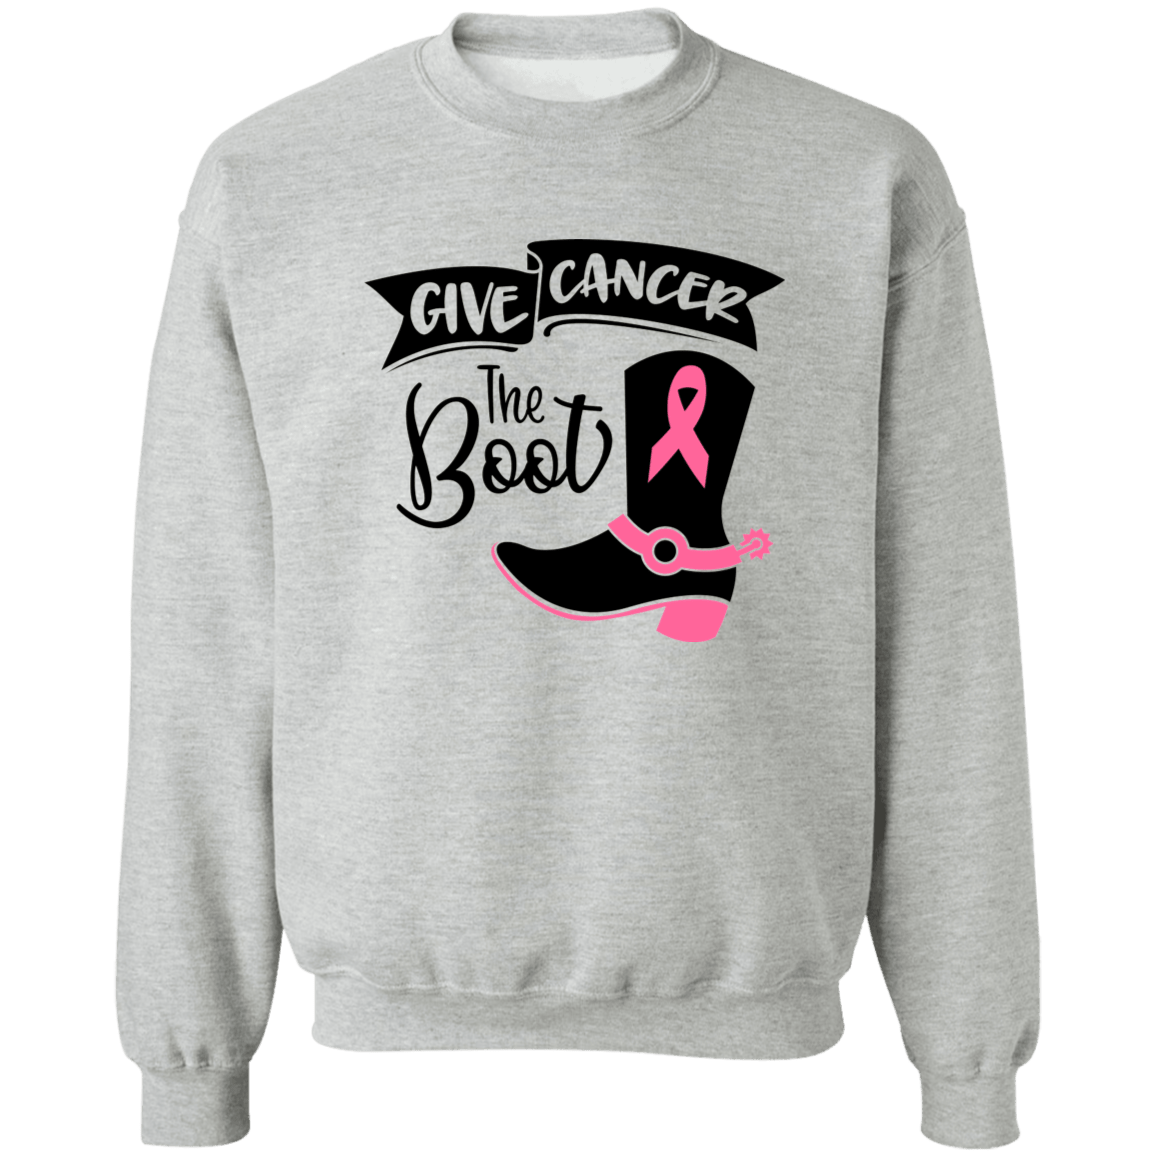 Give Cancer the Boot Unisex Crewneck Pullover Sweatshirt